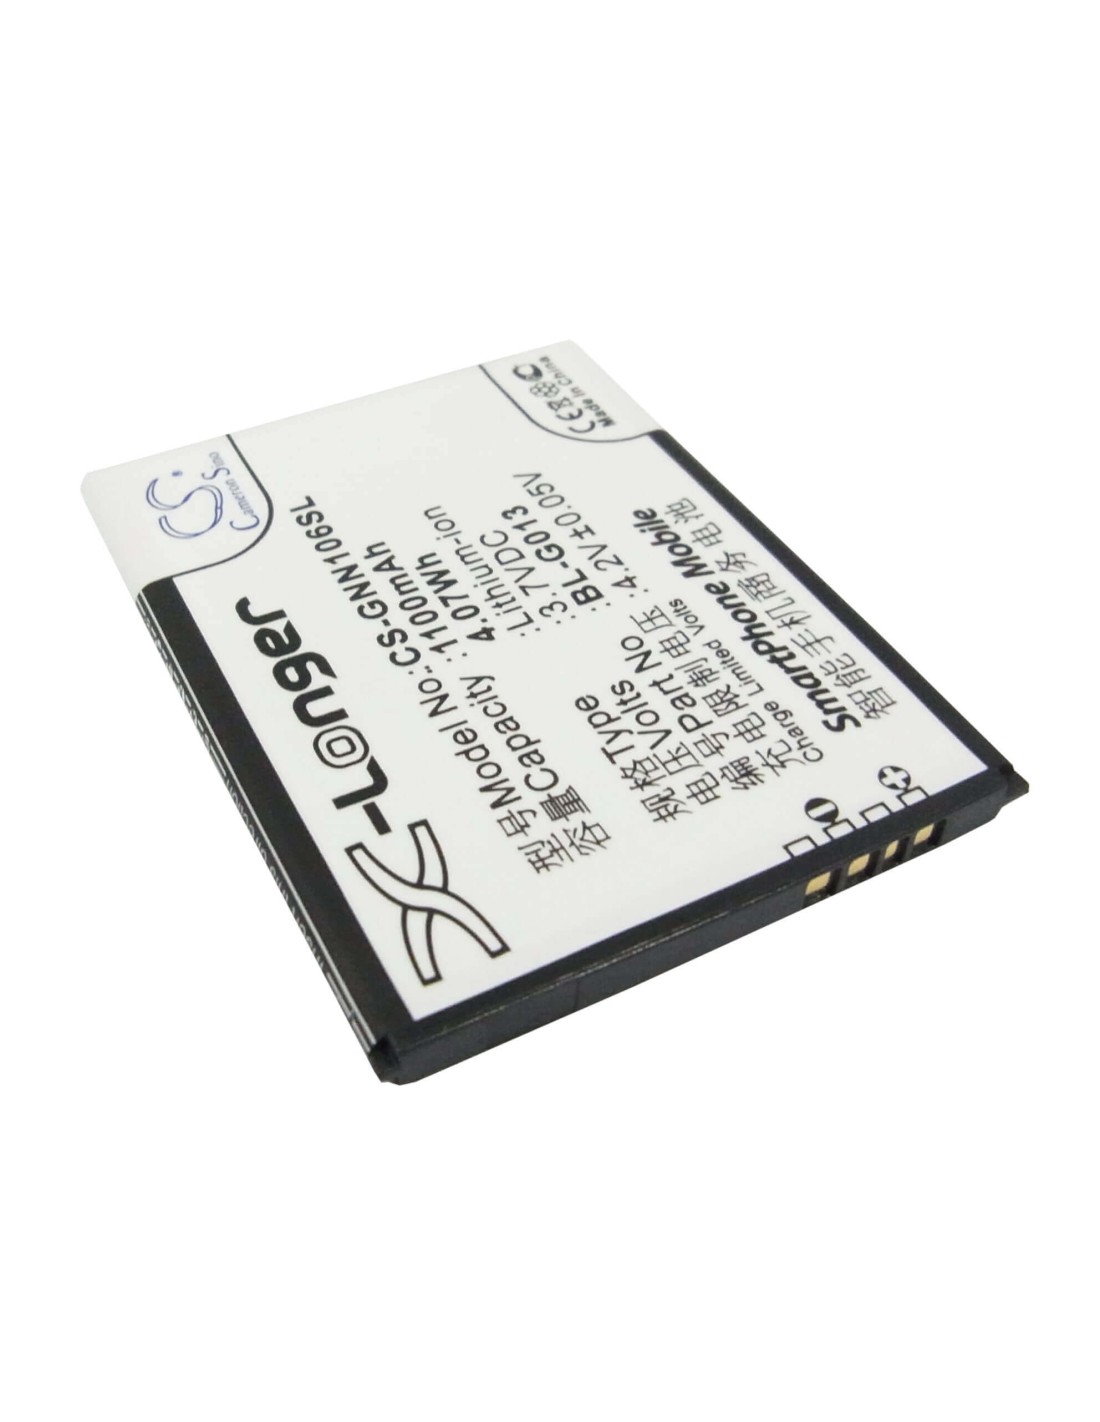 Battery for GIONEE GN106, GN109 3.7V, 1100mAh - 4.07Wh